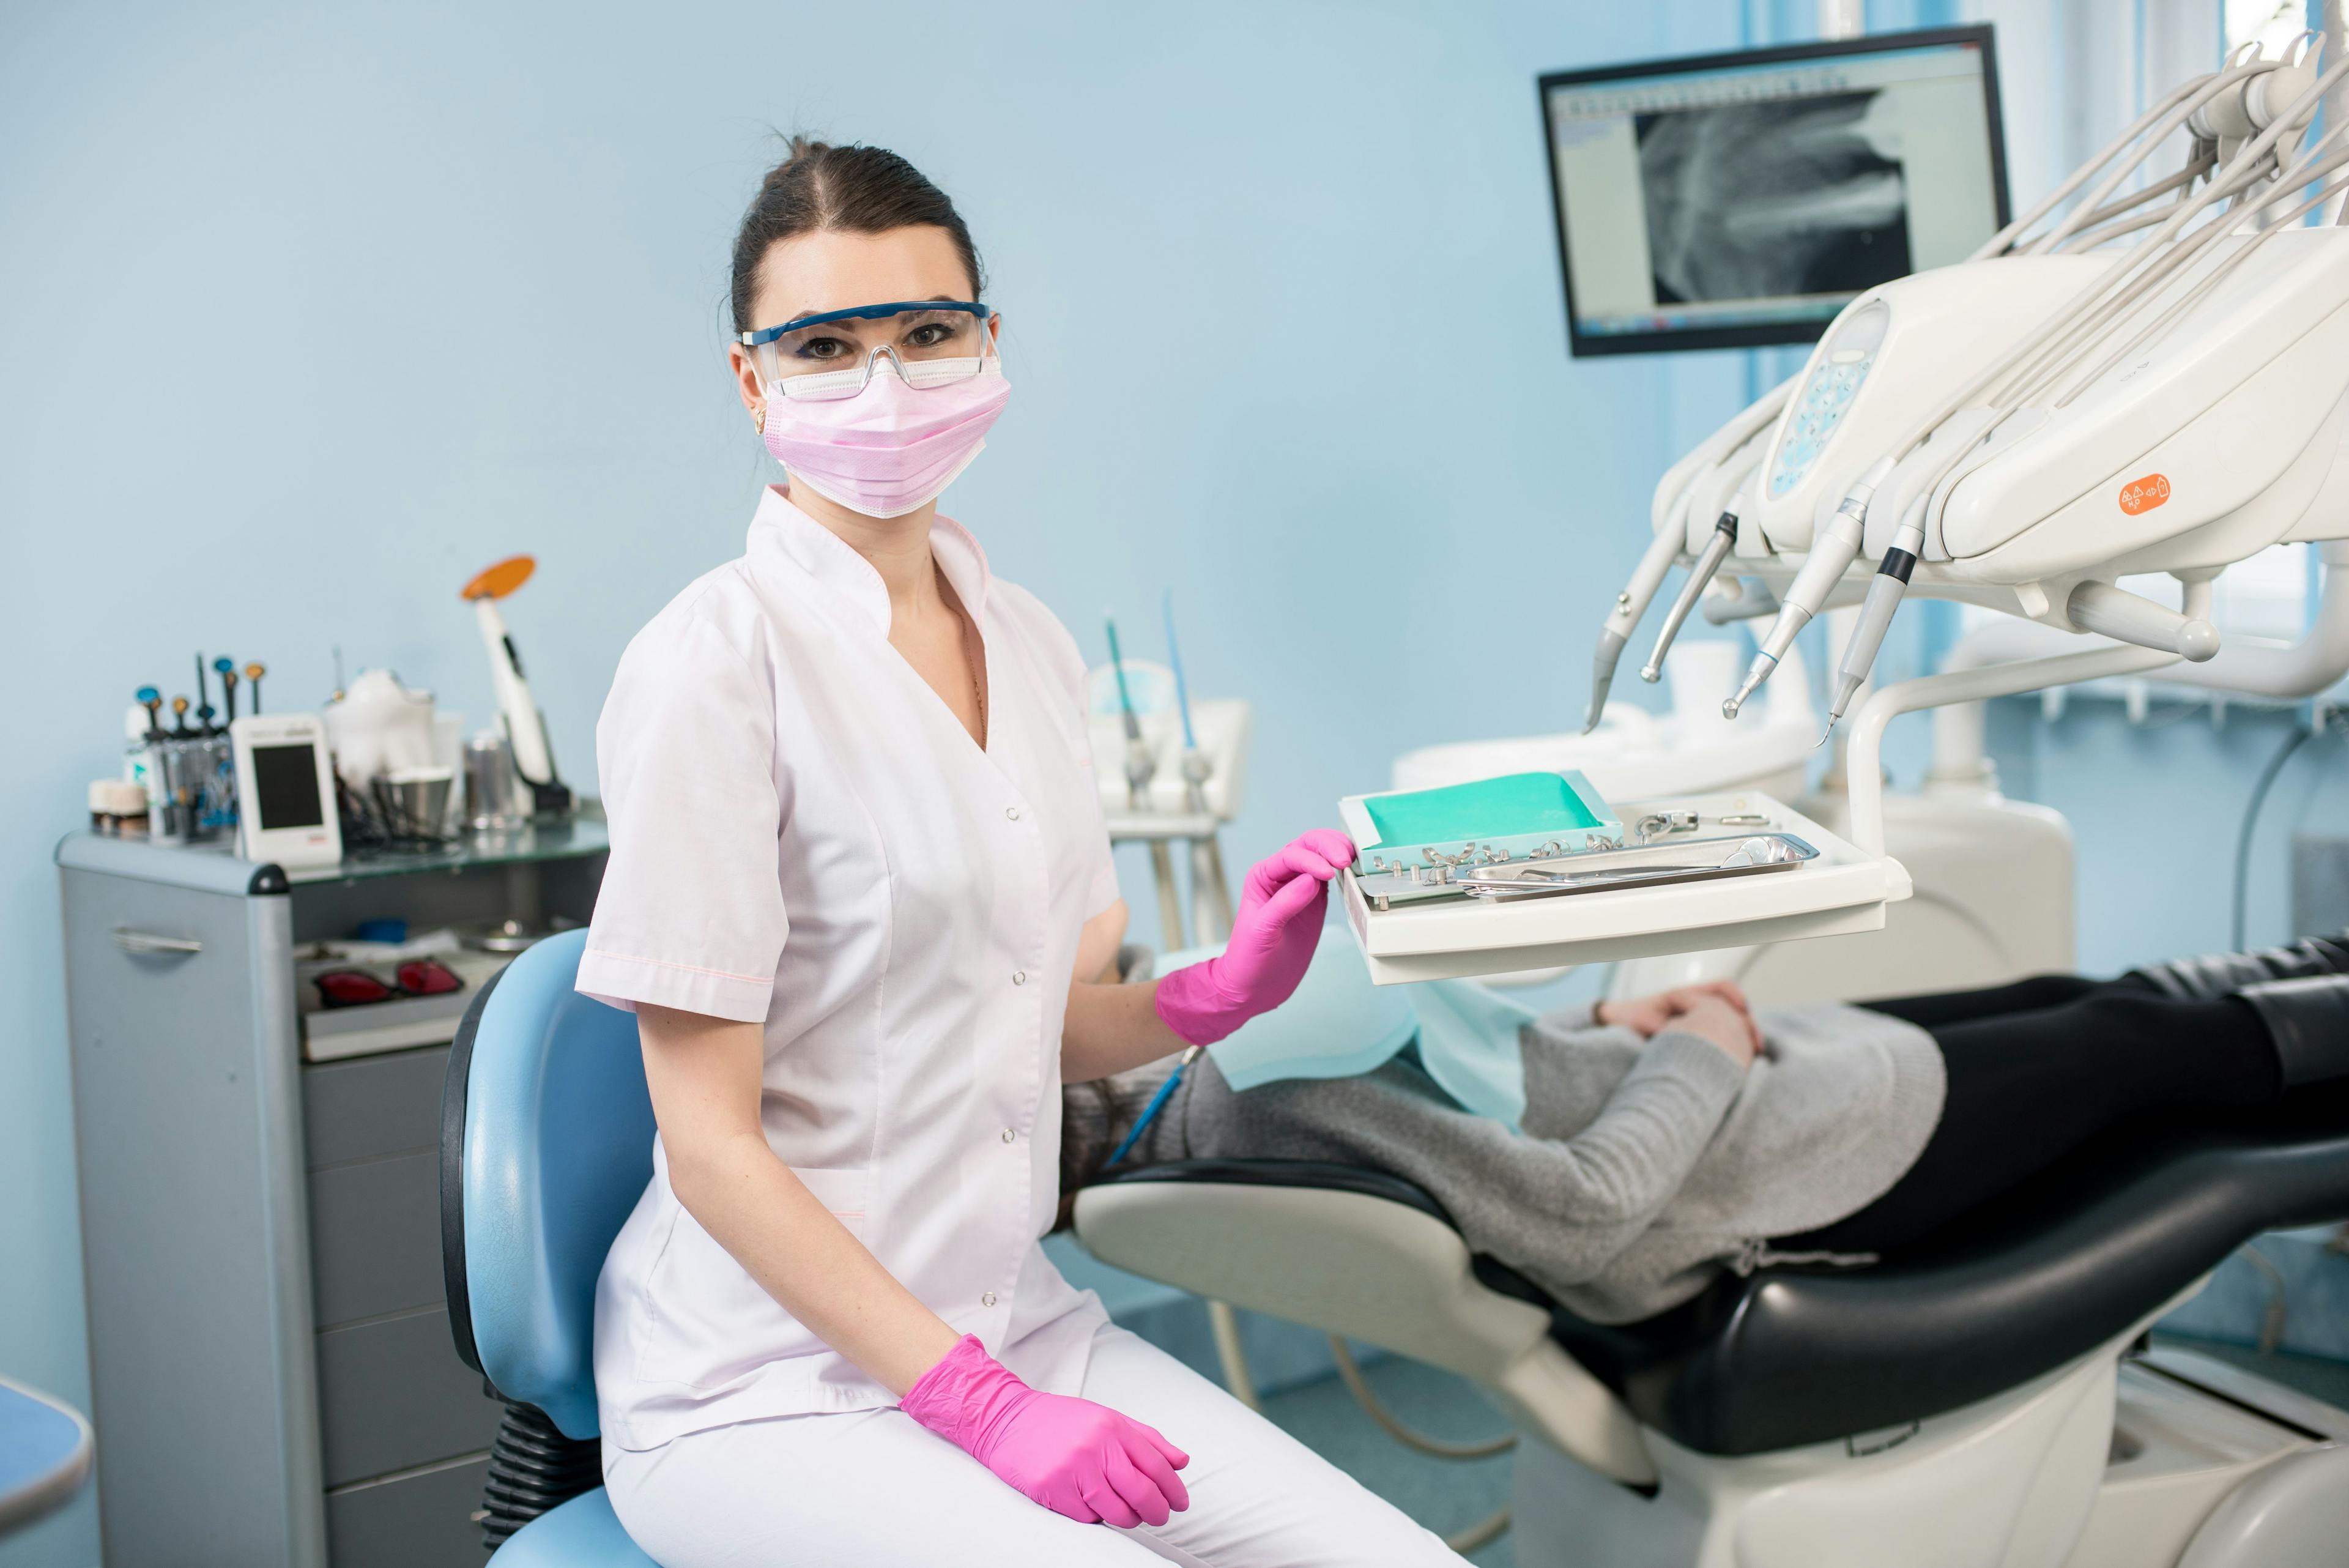 9 Tip for Hygienists to Speak Up and Take on Leadership Roles